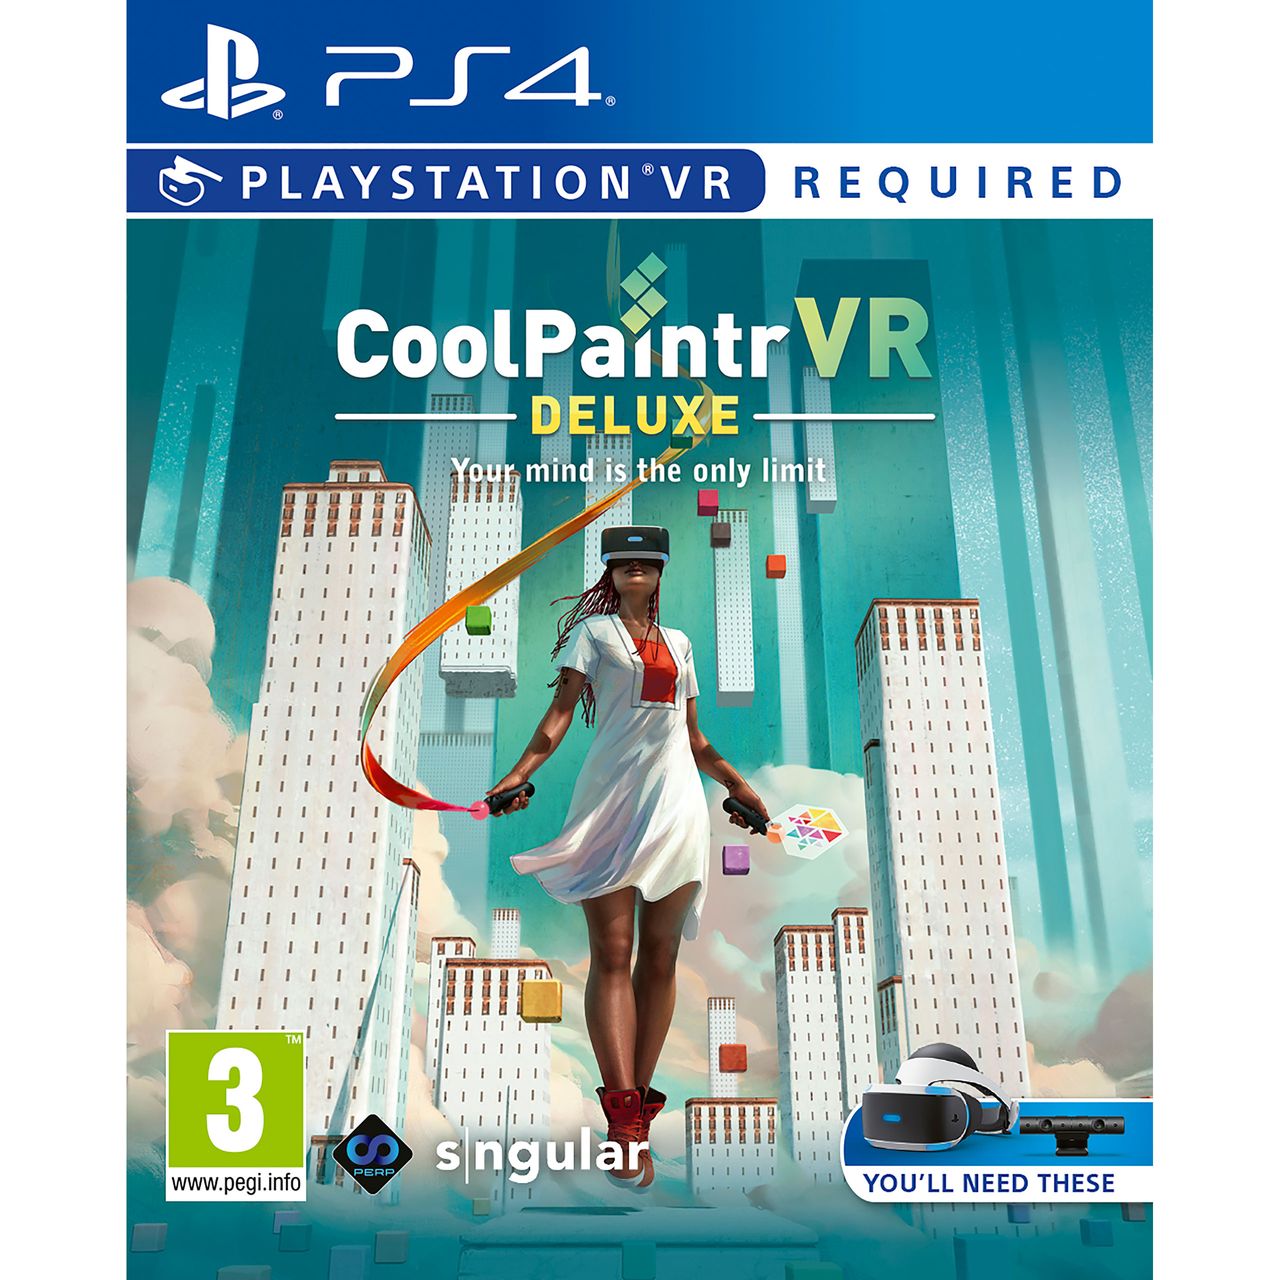 ps4 vr painting game